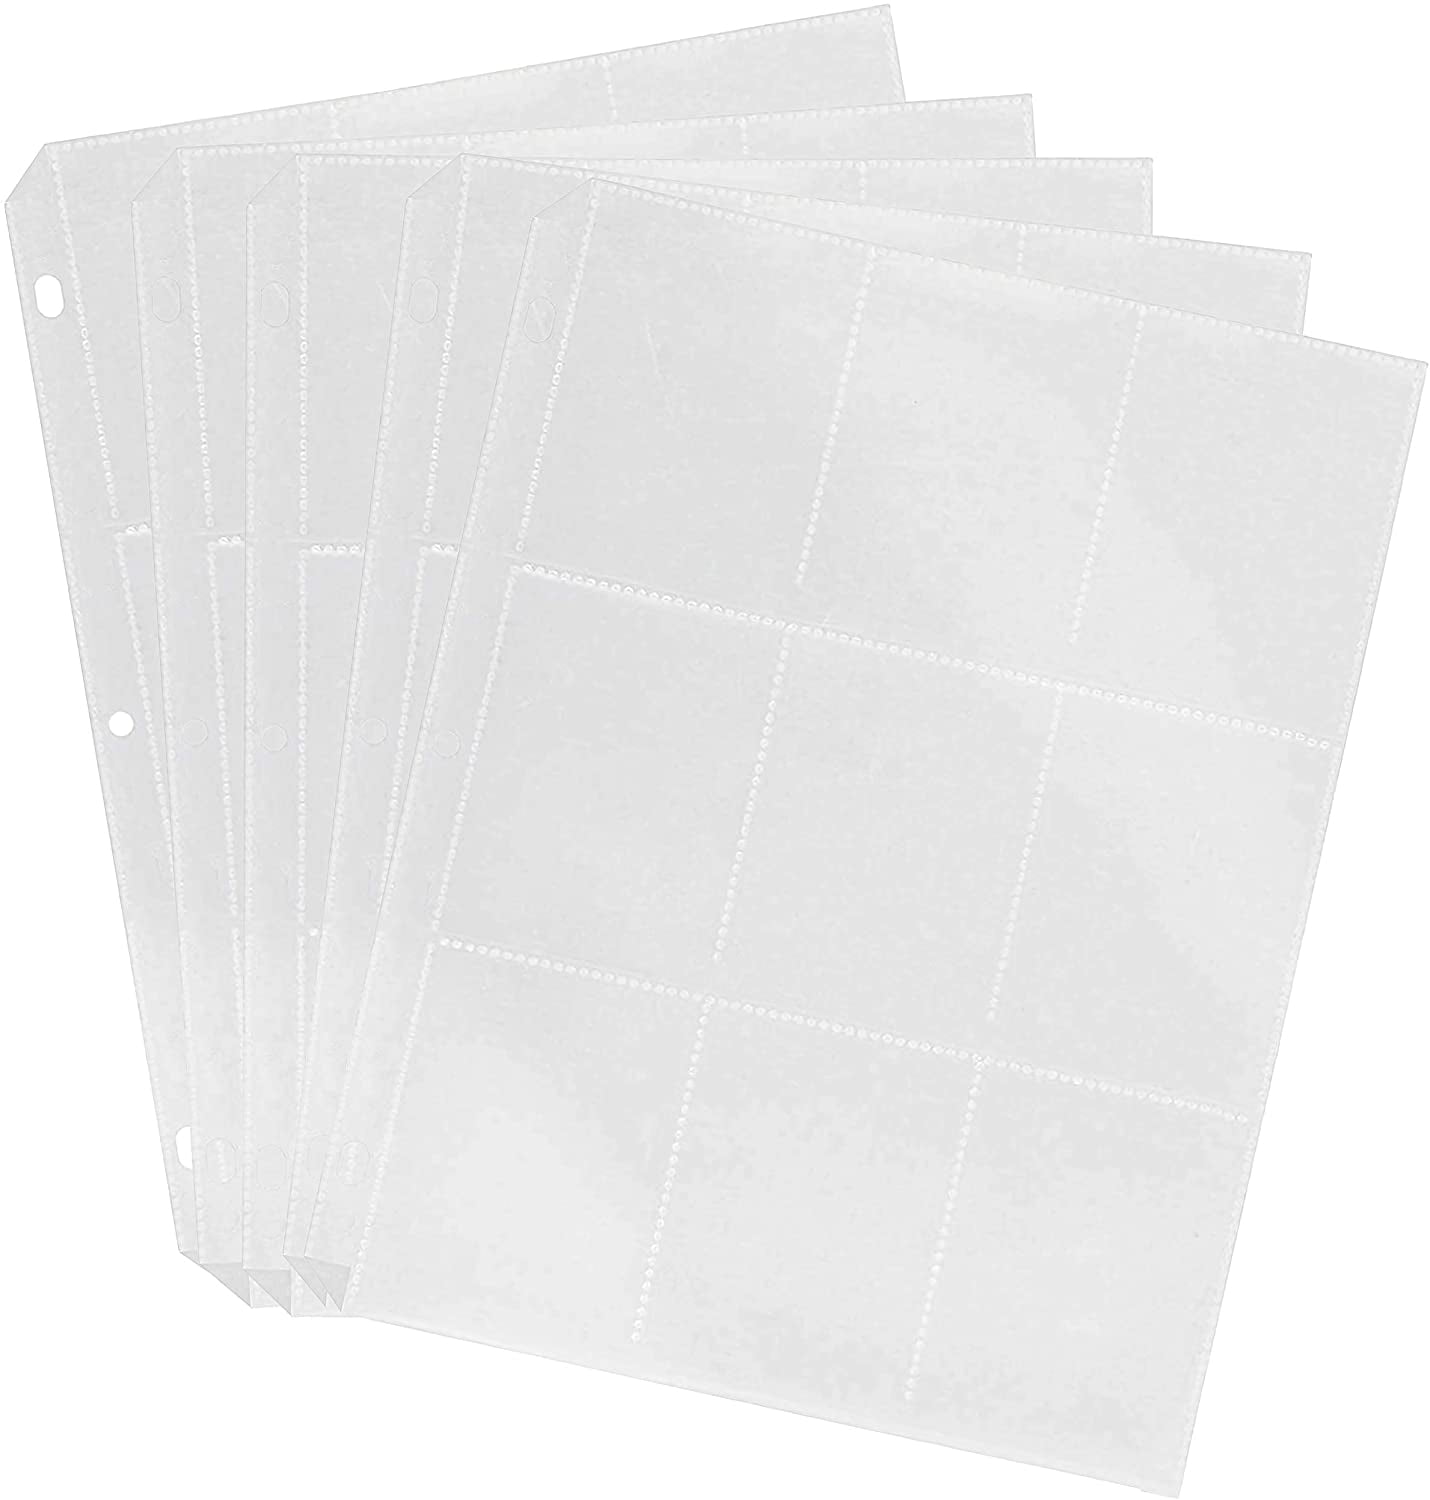 Pack of 4 Top Loading 9 Pockets Sports Card Holder fits 3.5 x 2.5 Sized Card with 11 Holes Holders Made to Fit Various Type of Ring Binders Holds up to 180 Cards 10 Per Pack - by Emraw 